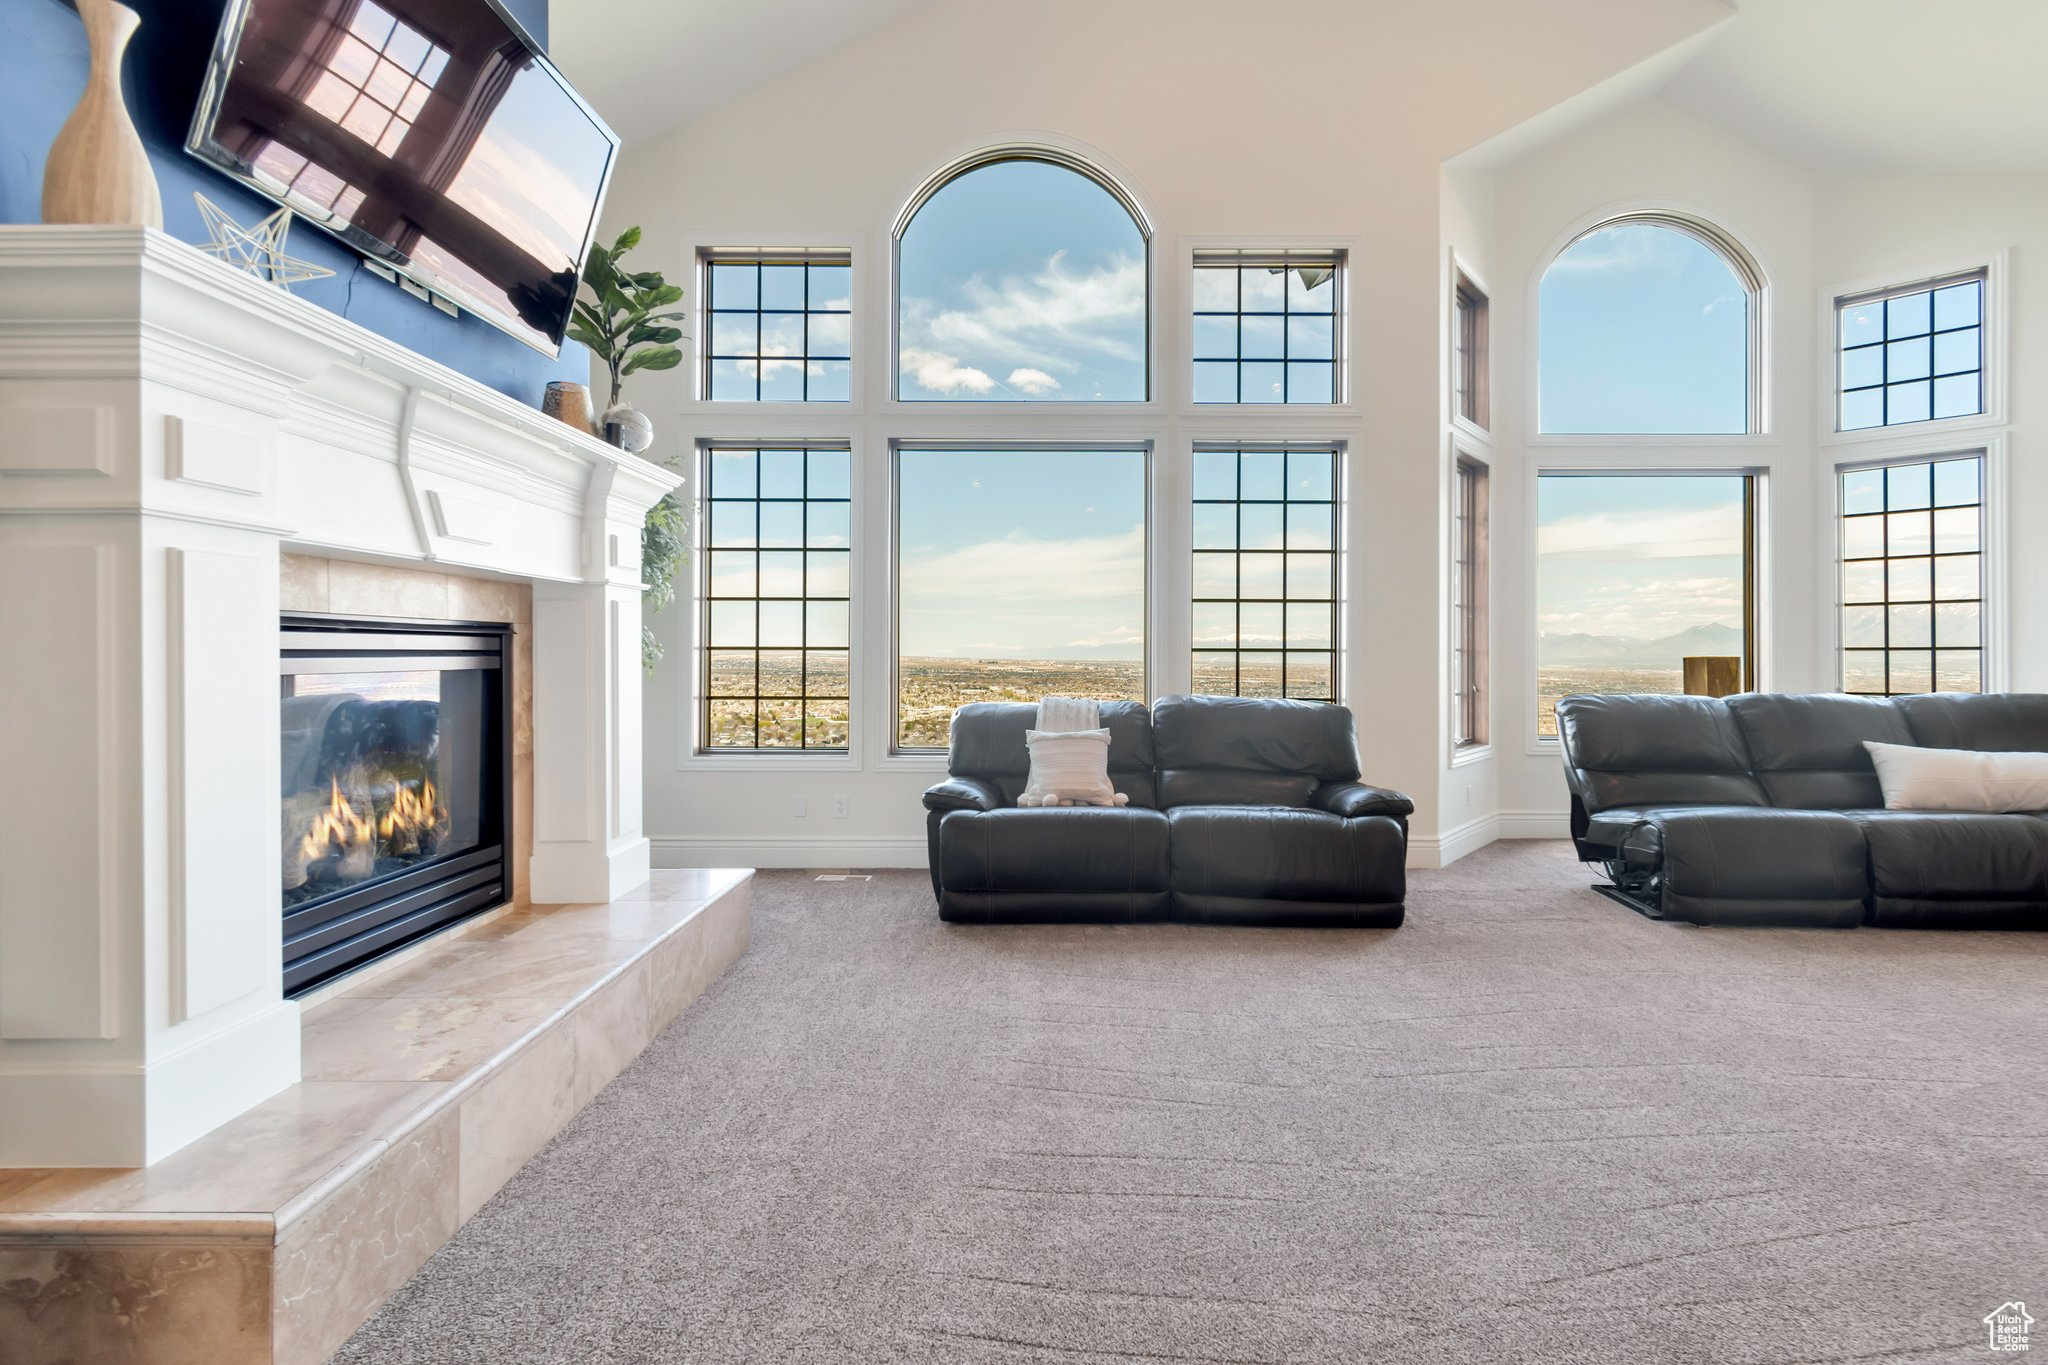 Living room featuring light colored carpet, high vaulted ceiling, and a fireplace